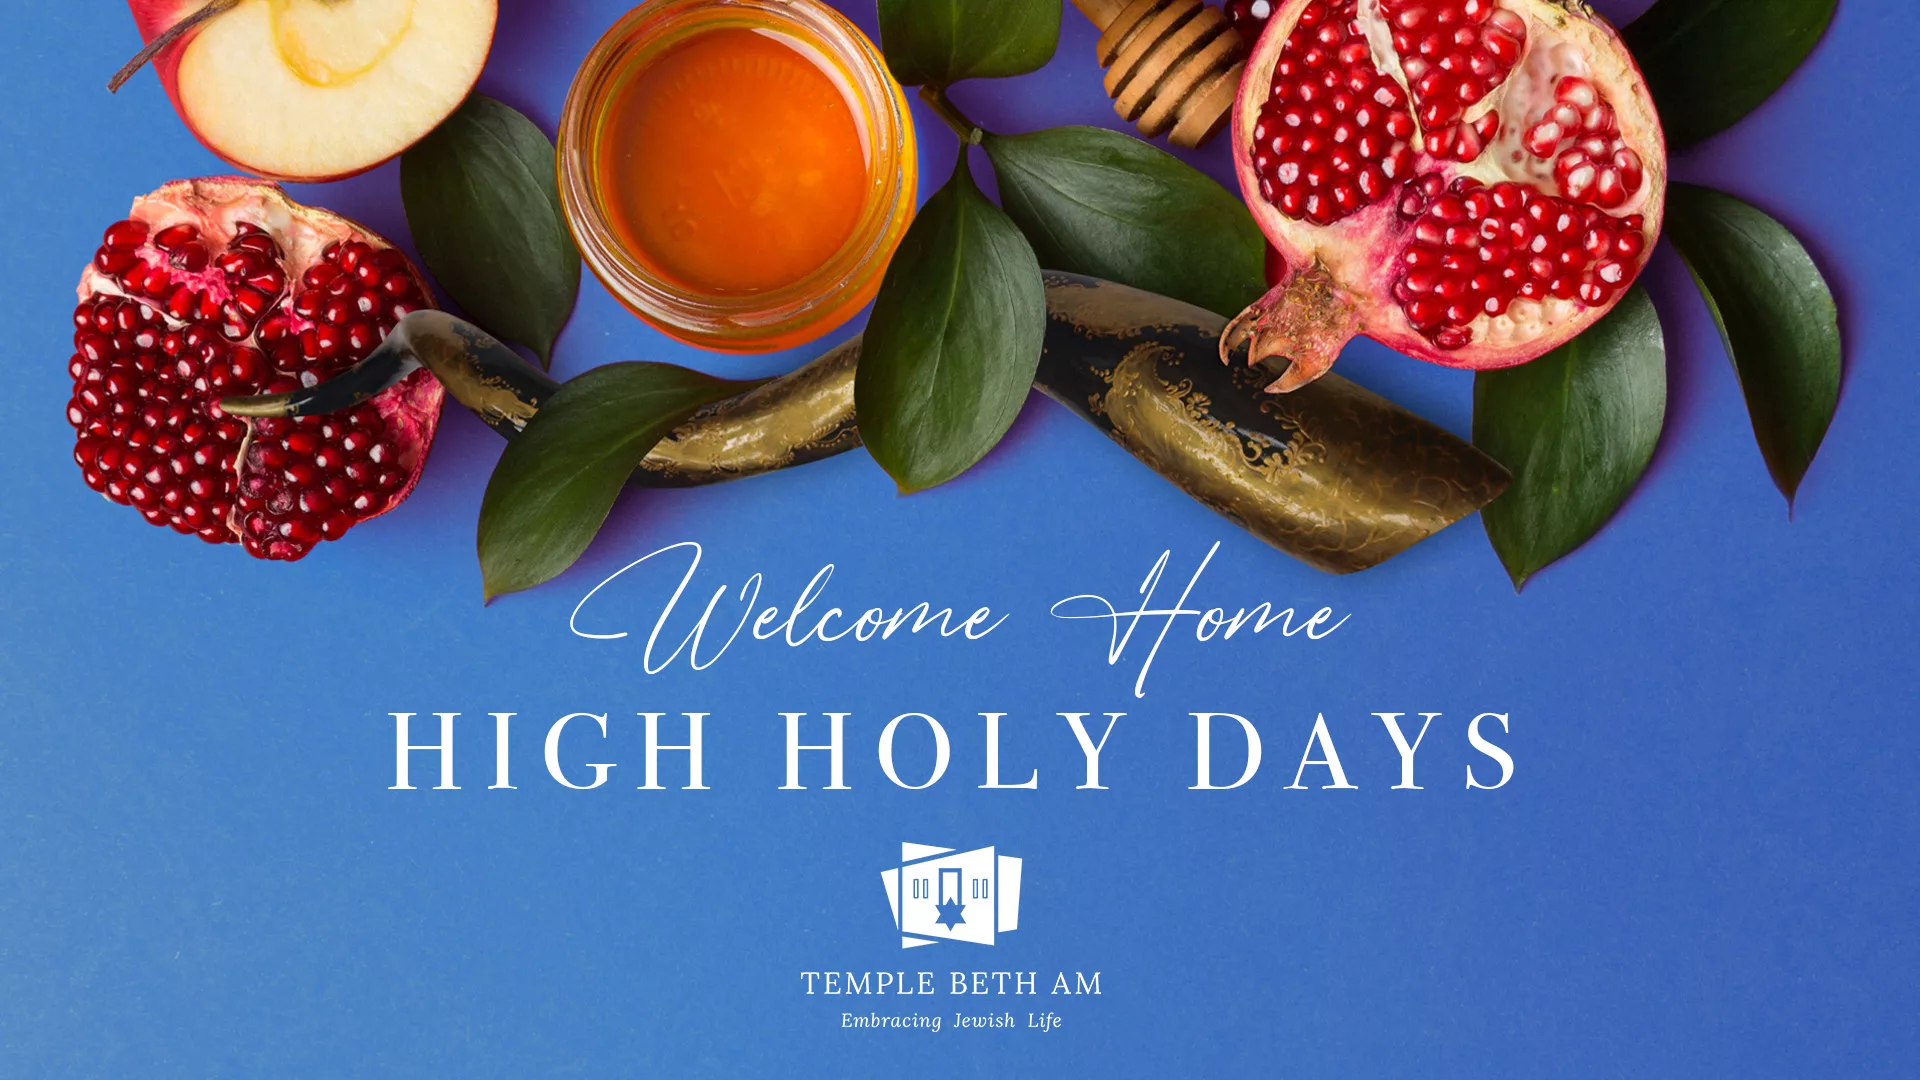 Welcome Home for the High Holy Days